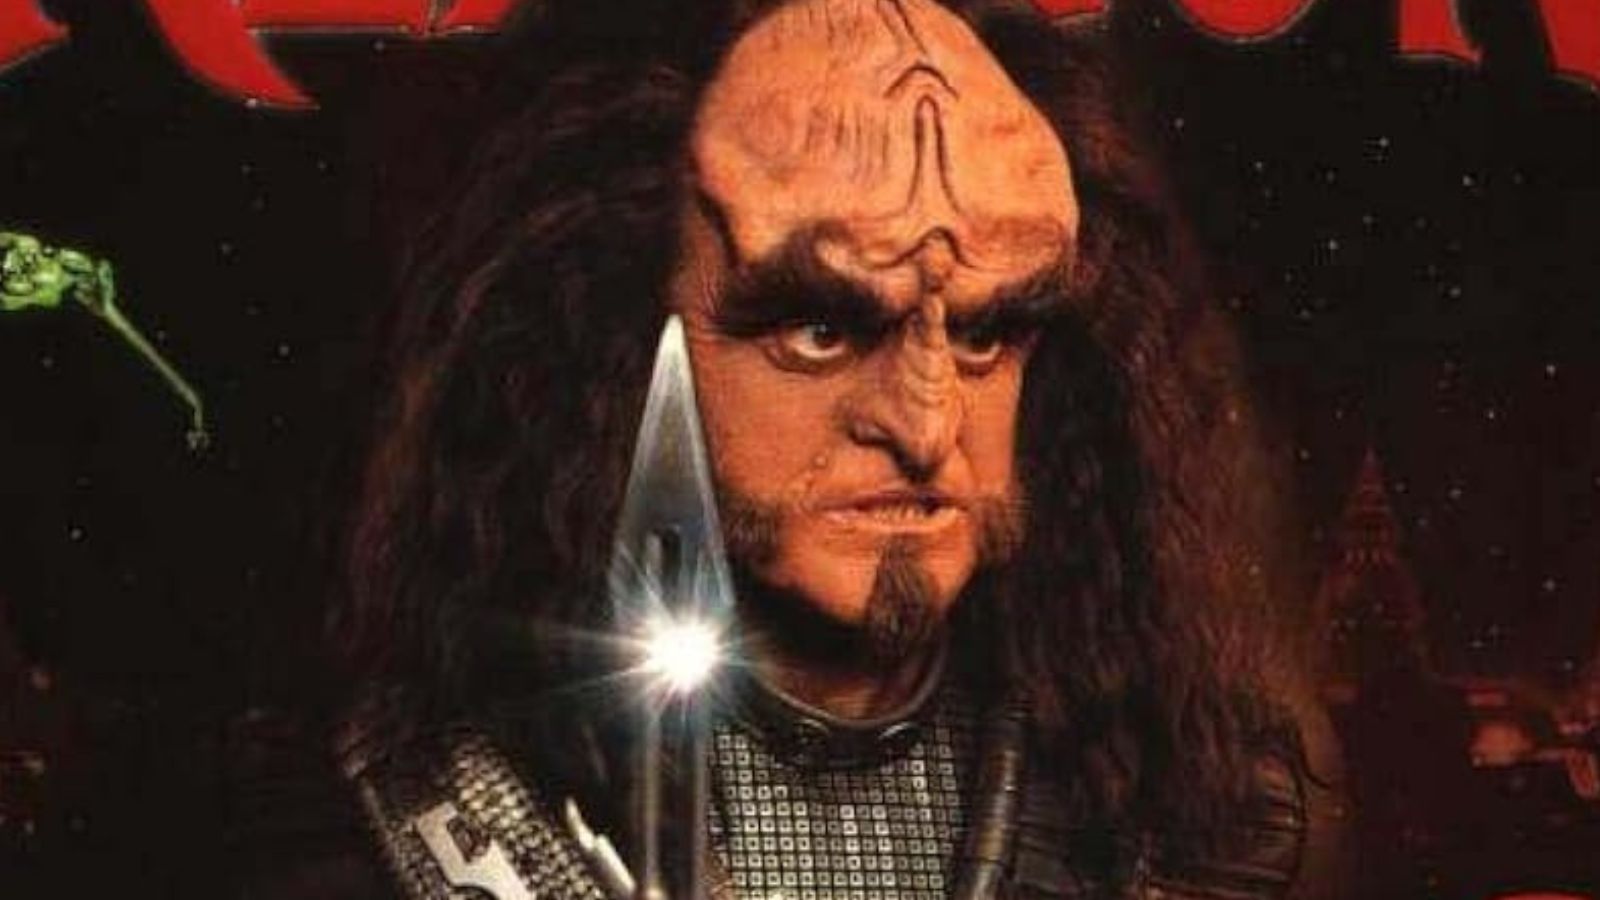 <span>As you may already know, Klingon is a real language. There is an actual Klingon Institute where you can learn to speak it fluently. </span>